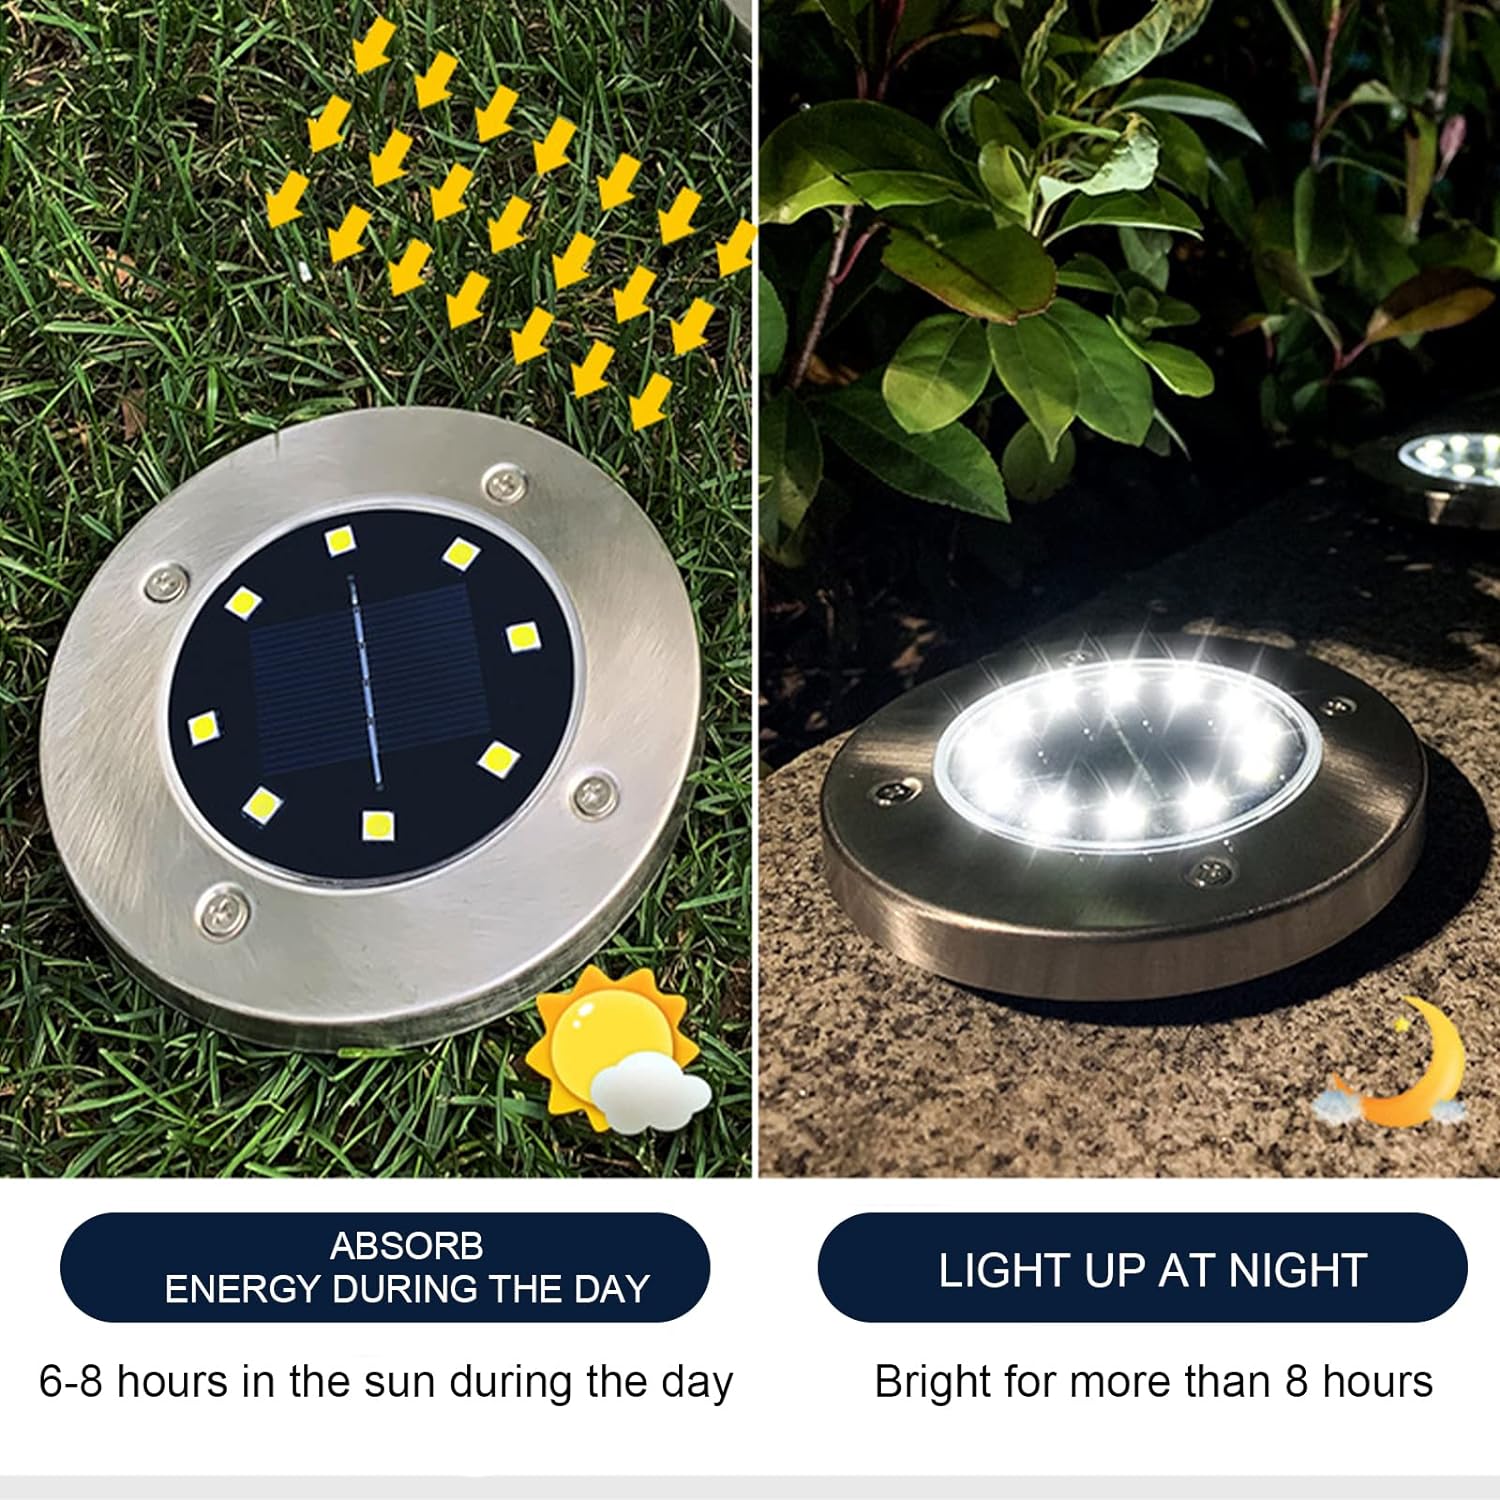 Humbgo Solar Lights Outdoor Garden - 6 Pieces Solar Garden Lights Powered with LED Lights Waterproof Solar Ornament Lights for Garden Lawn Pathway,Landscape (Warm White)           [Energy Class A++]